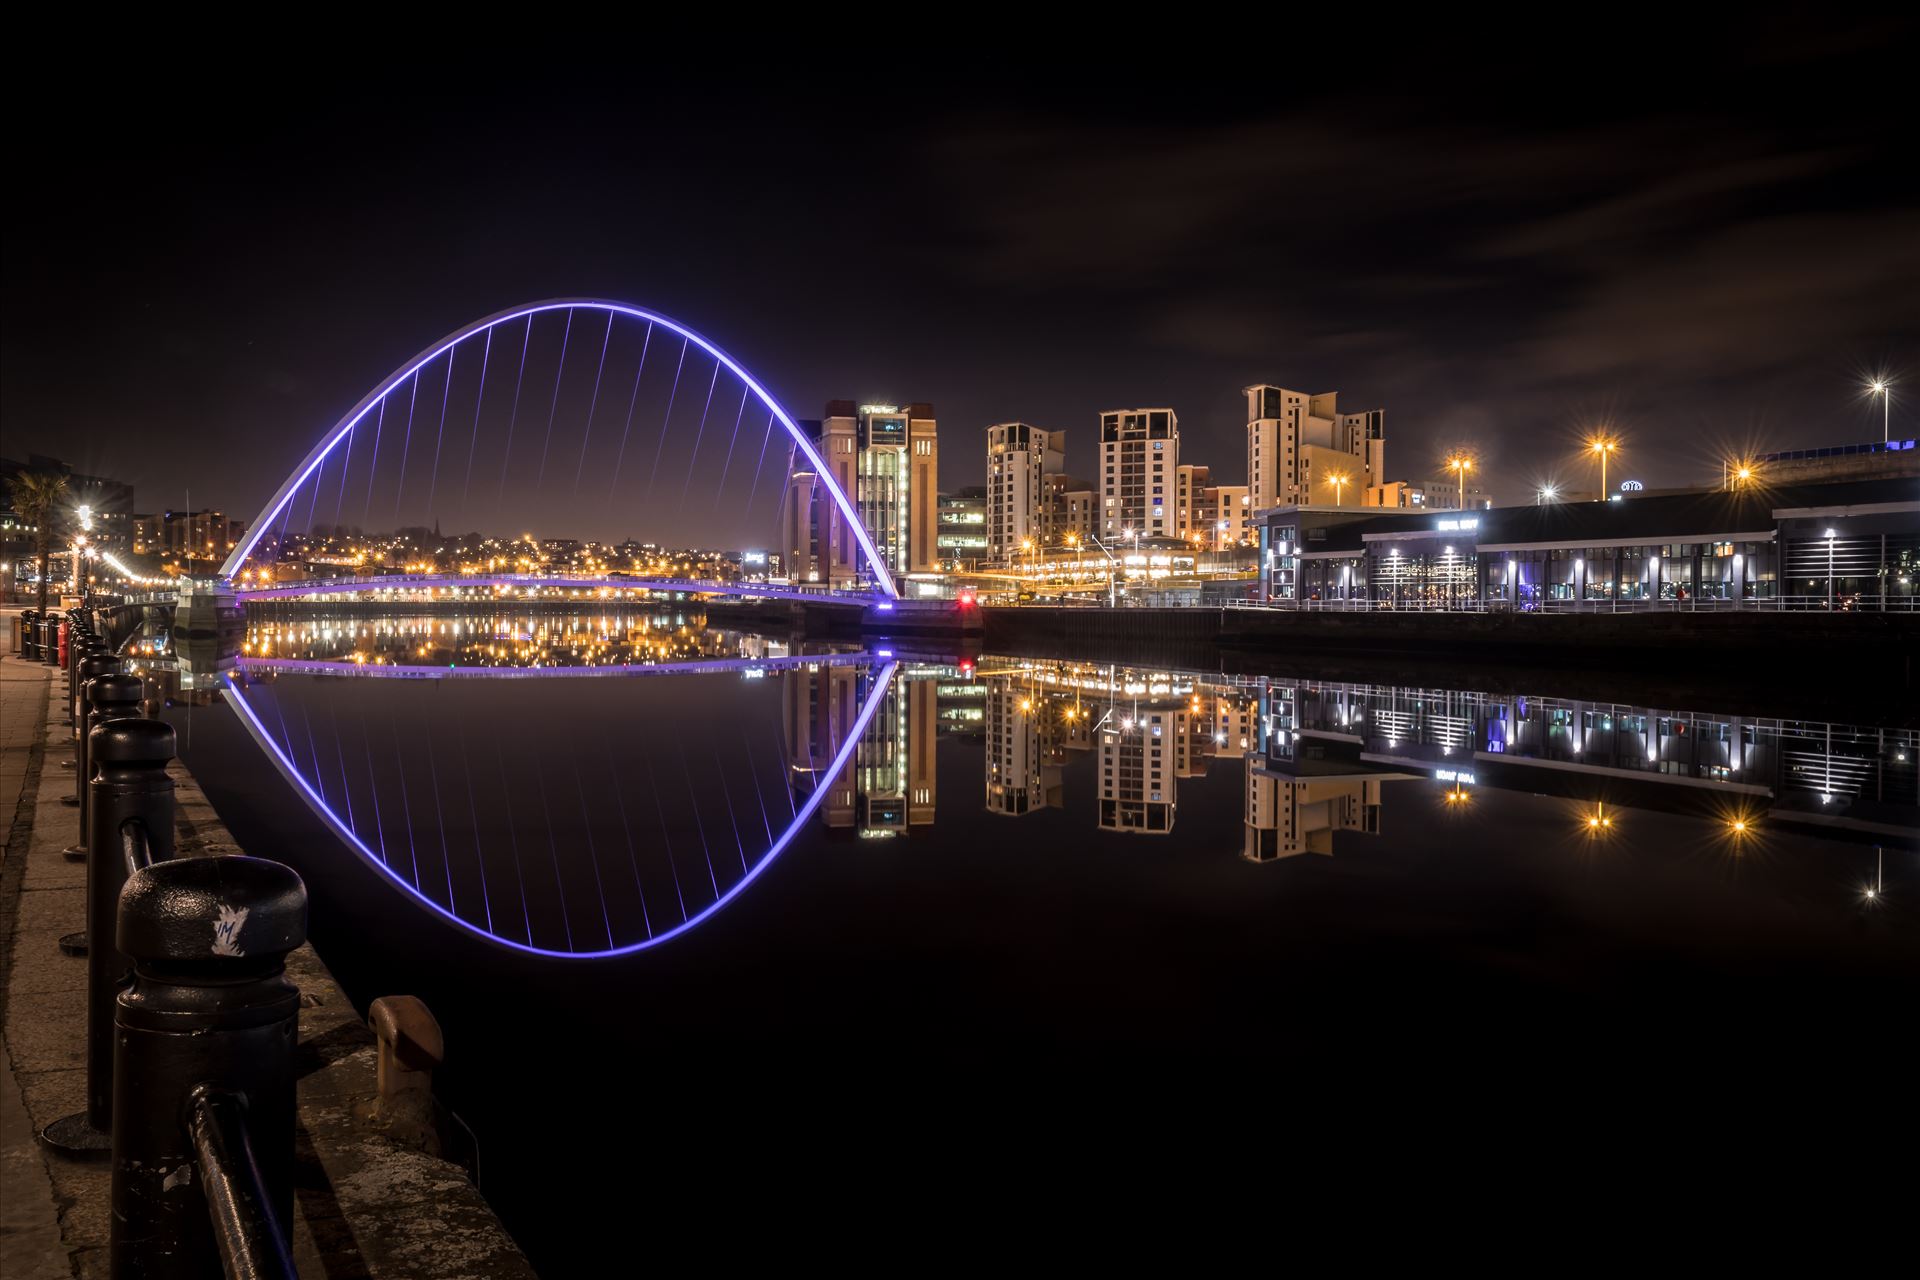 Reflections on the River Tyne 4  by philreay